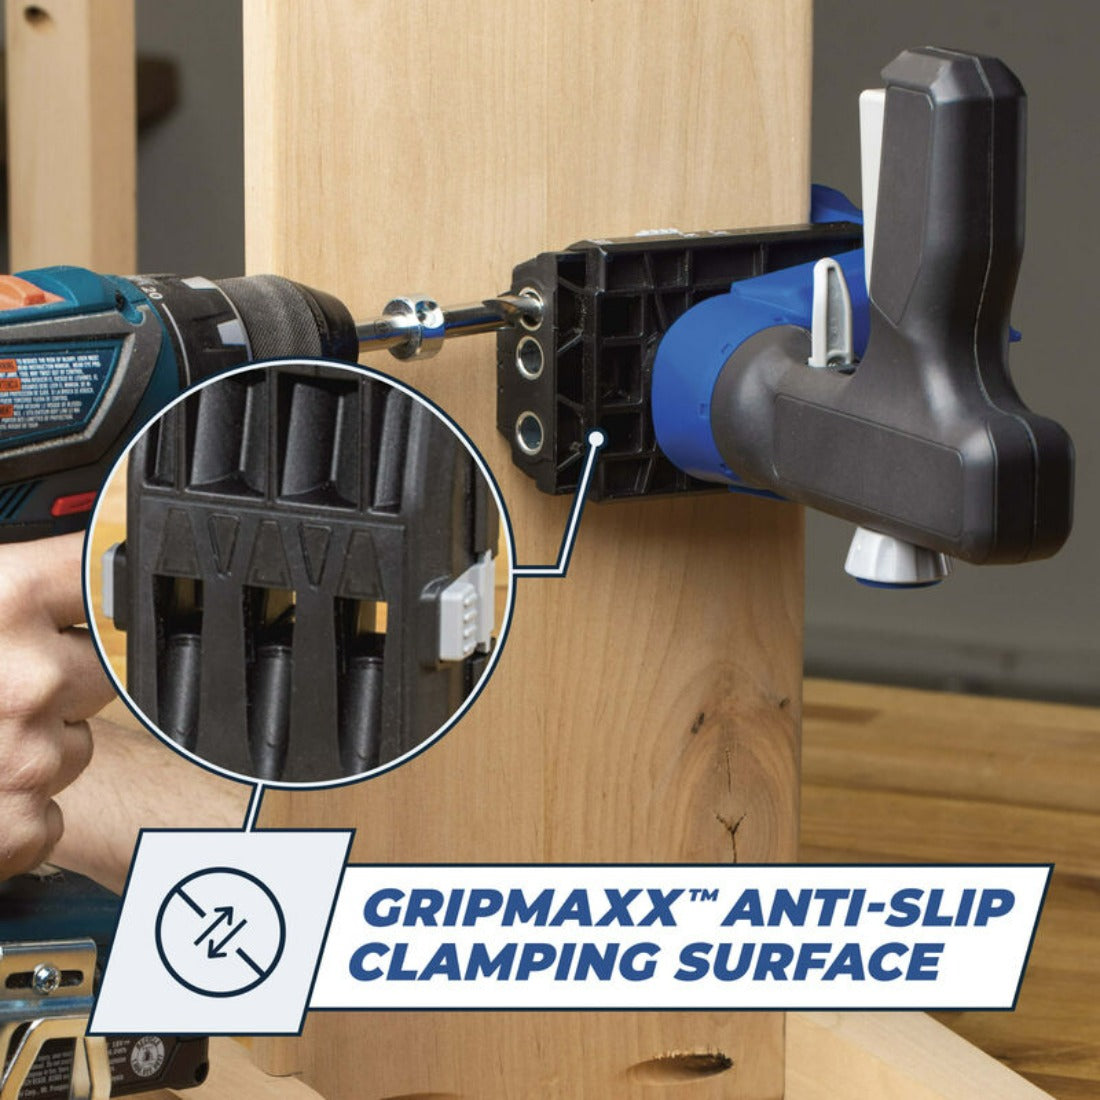 plank being drilled with cordless drill for pocket screws into plank held with the 520pro jig and caption reading "gripmaxx anti-slip clamping surface"